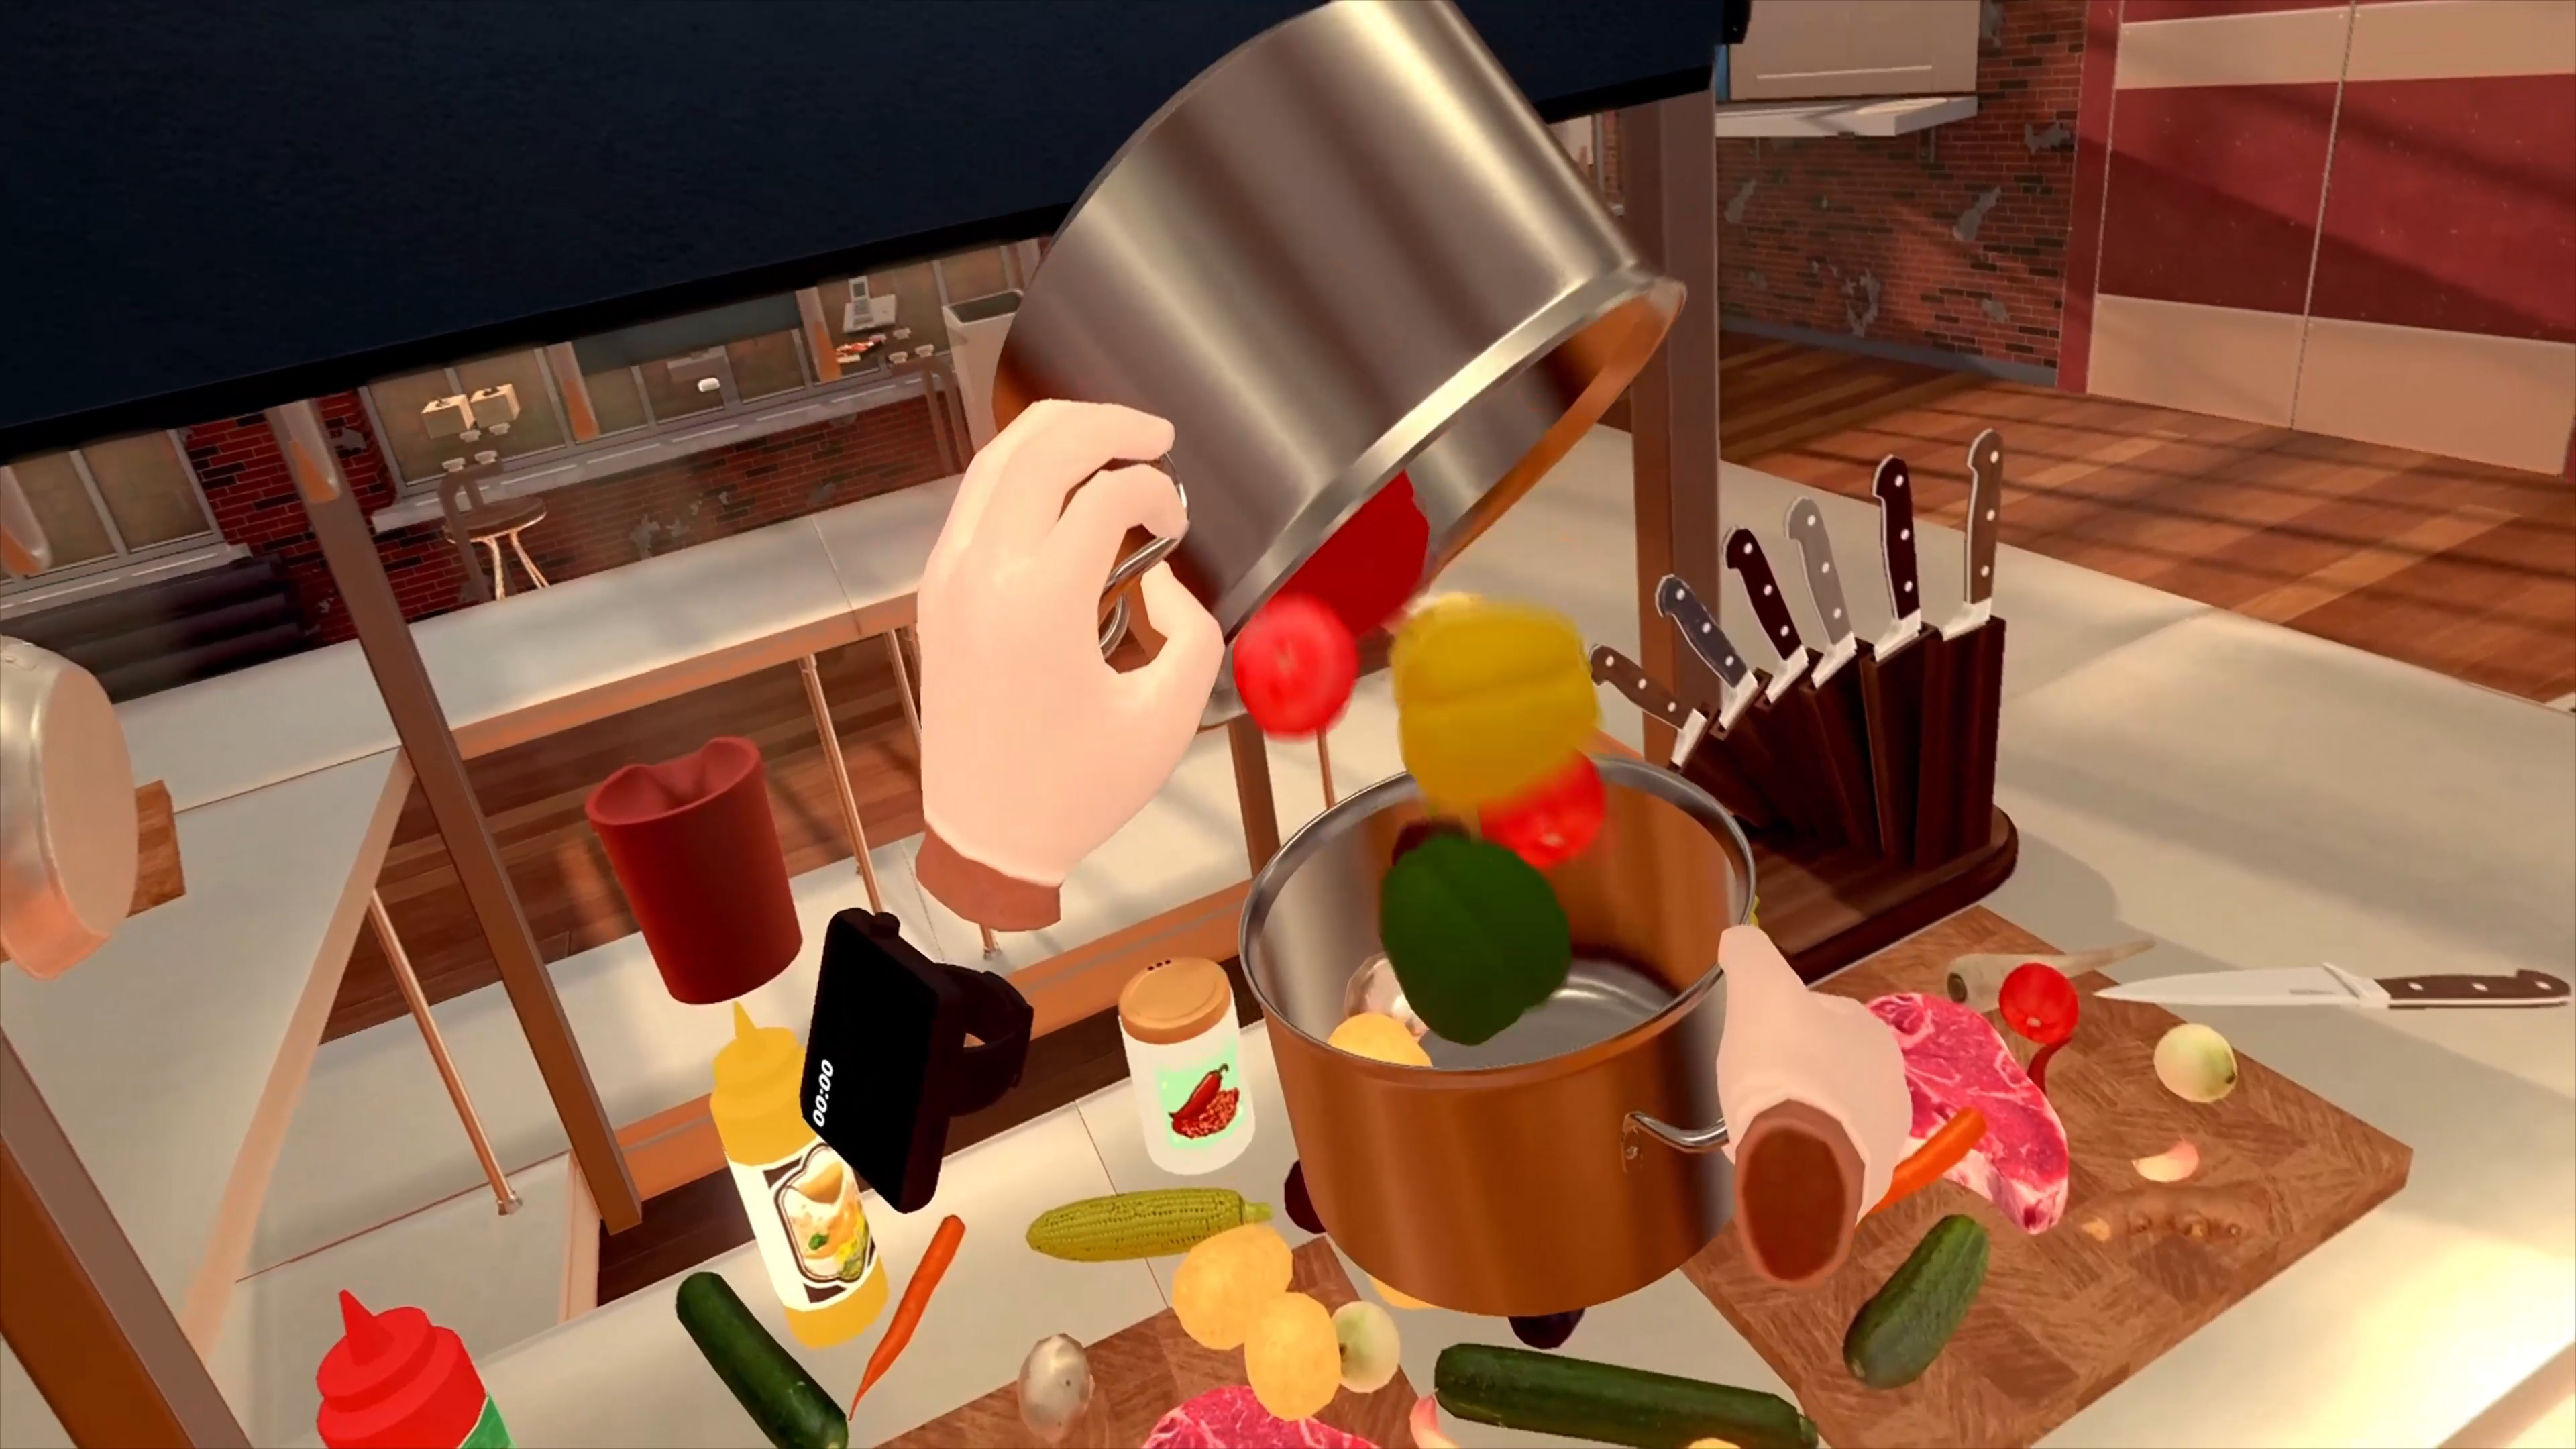 Cooking Simulator VR Review: A Frantic Celebration Of VR Realism And Chaos